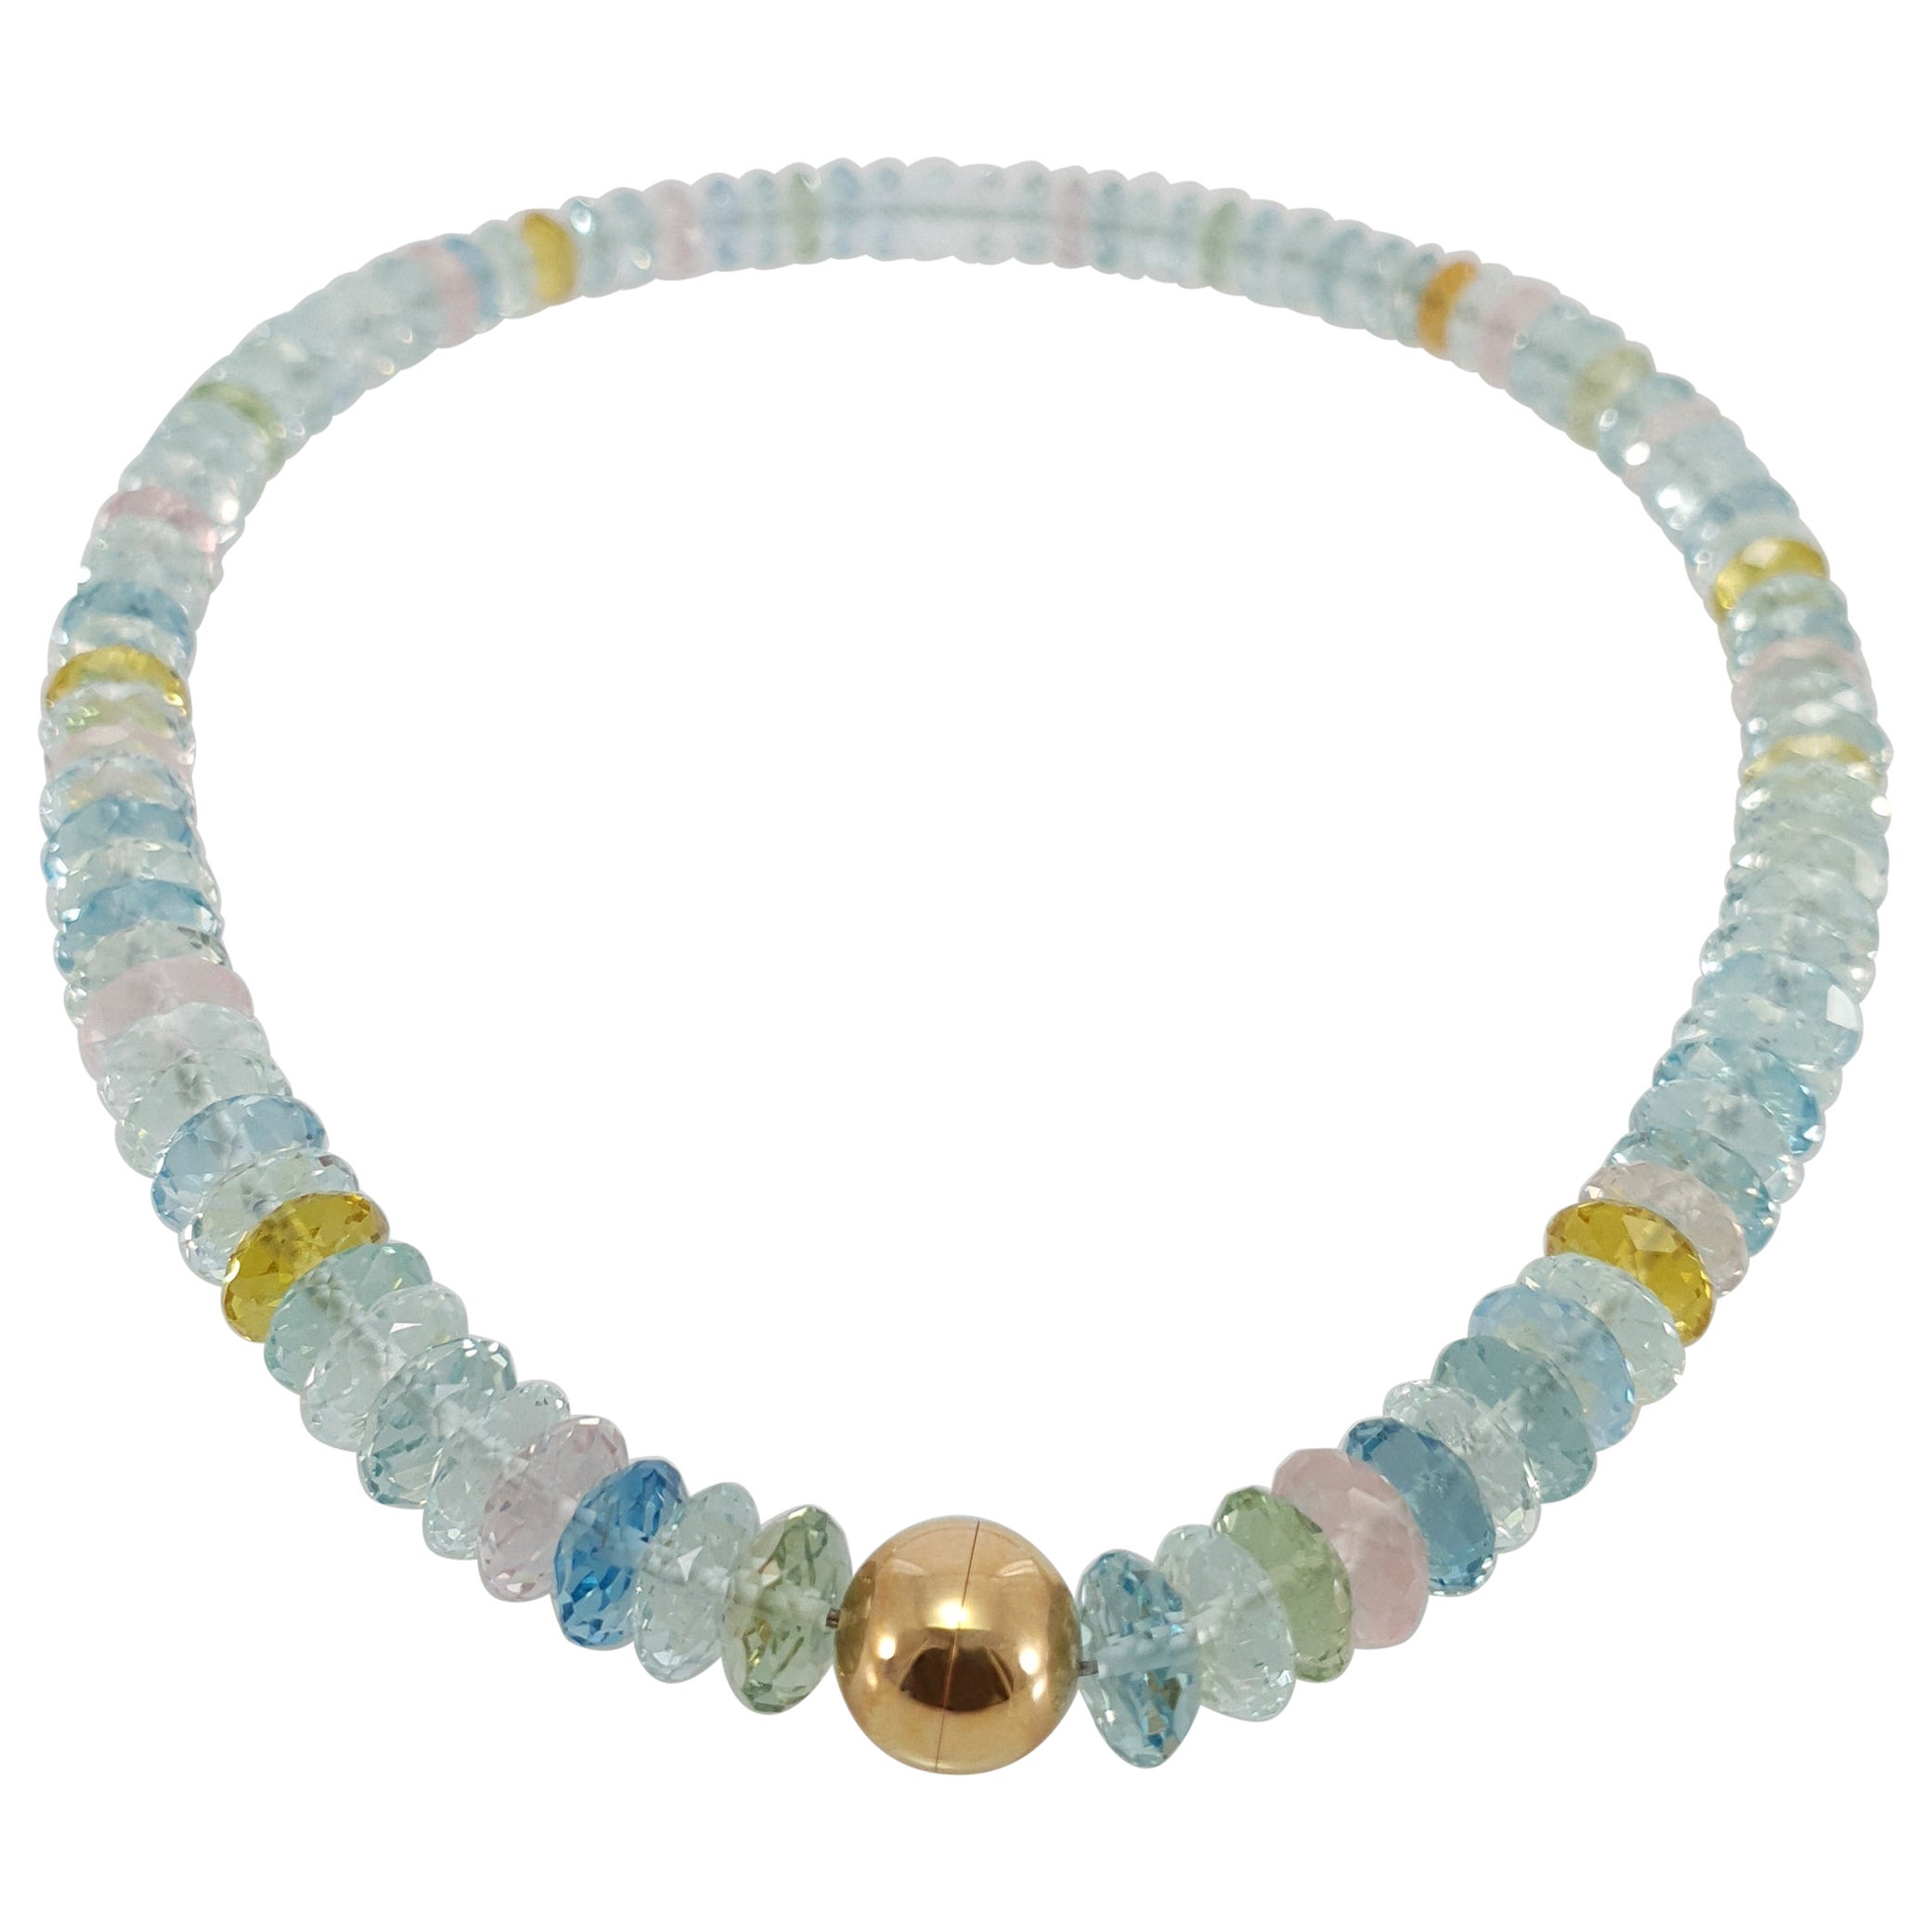 Faceted Multicolour Beryl Rondel Beaded Necklace with 18 Carat Rose Gold Clasp